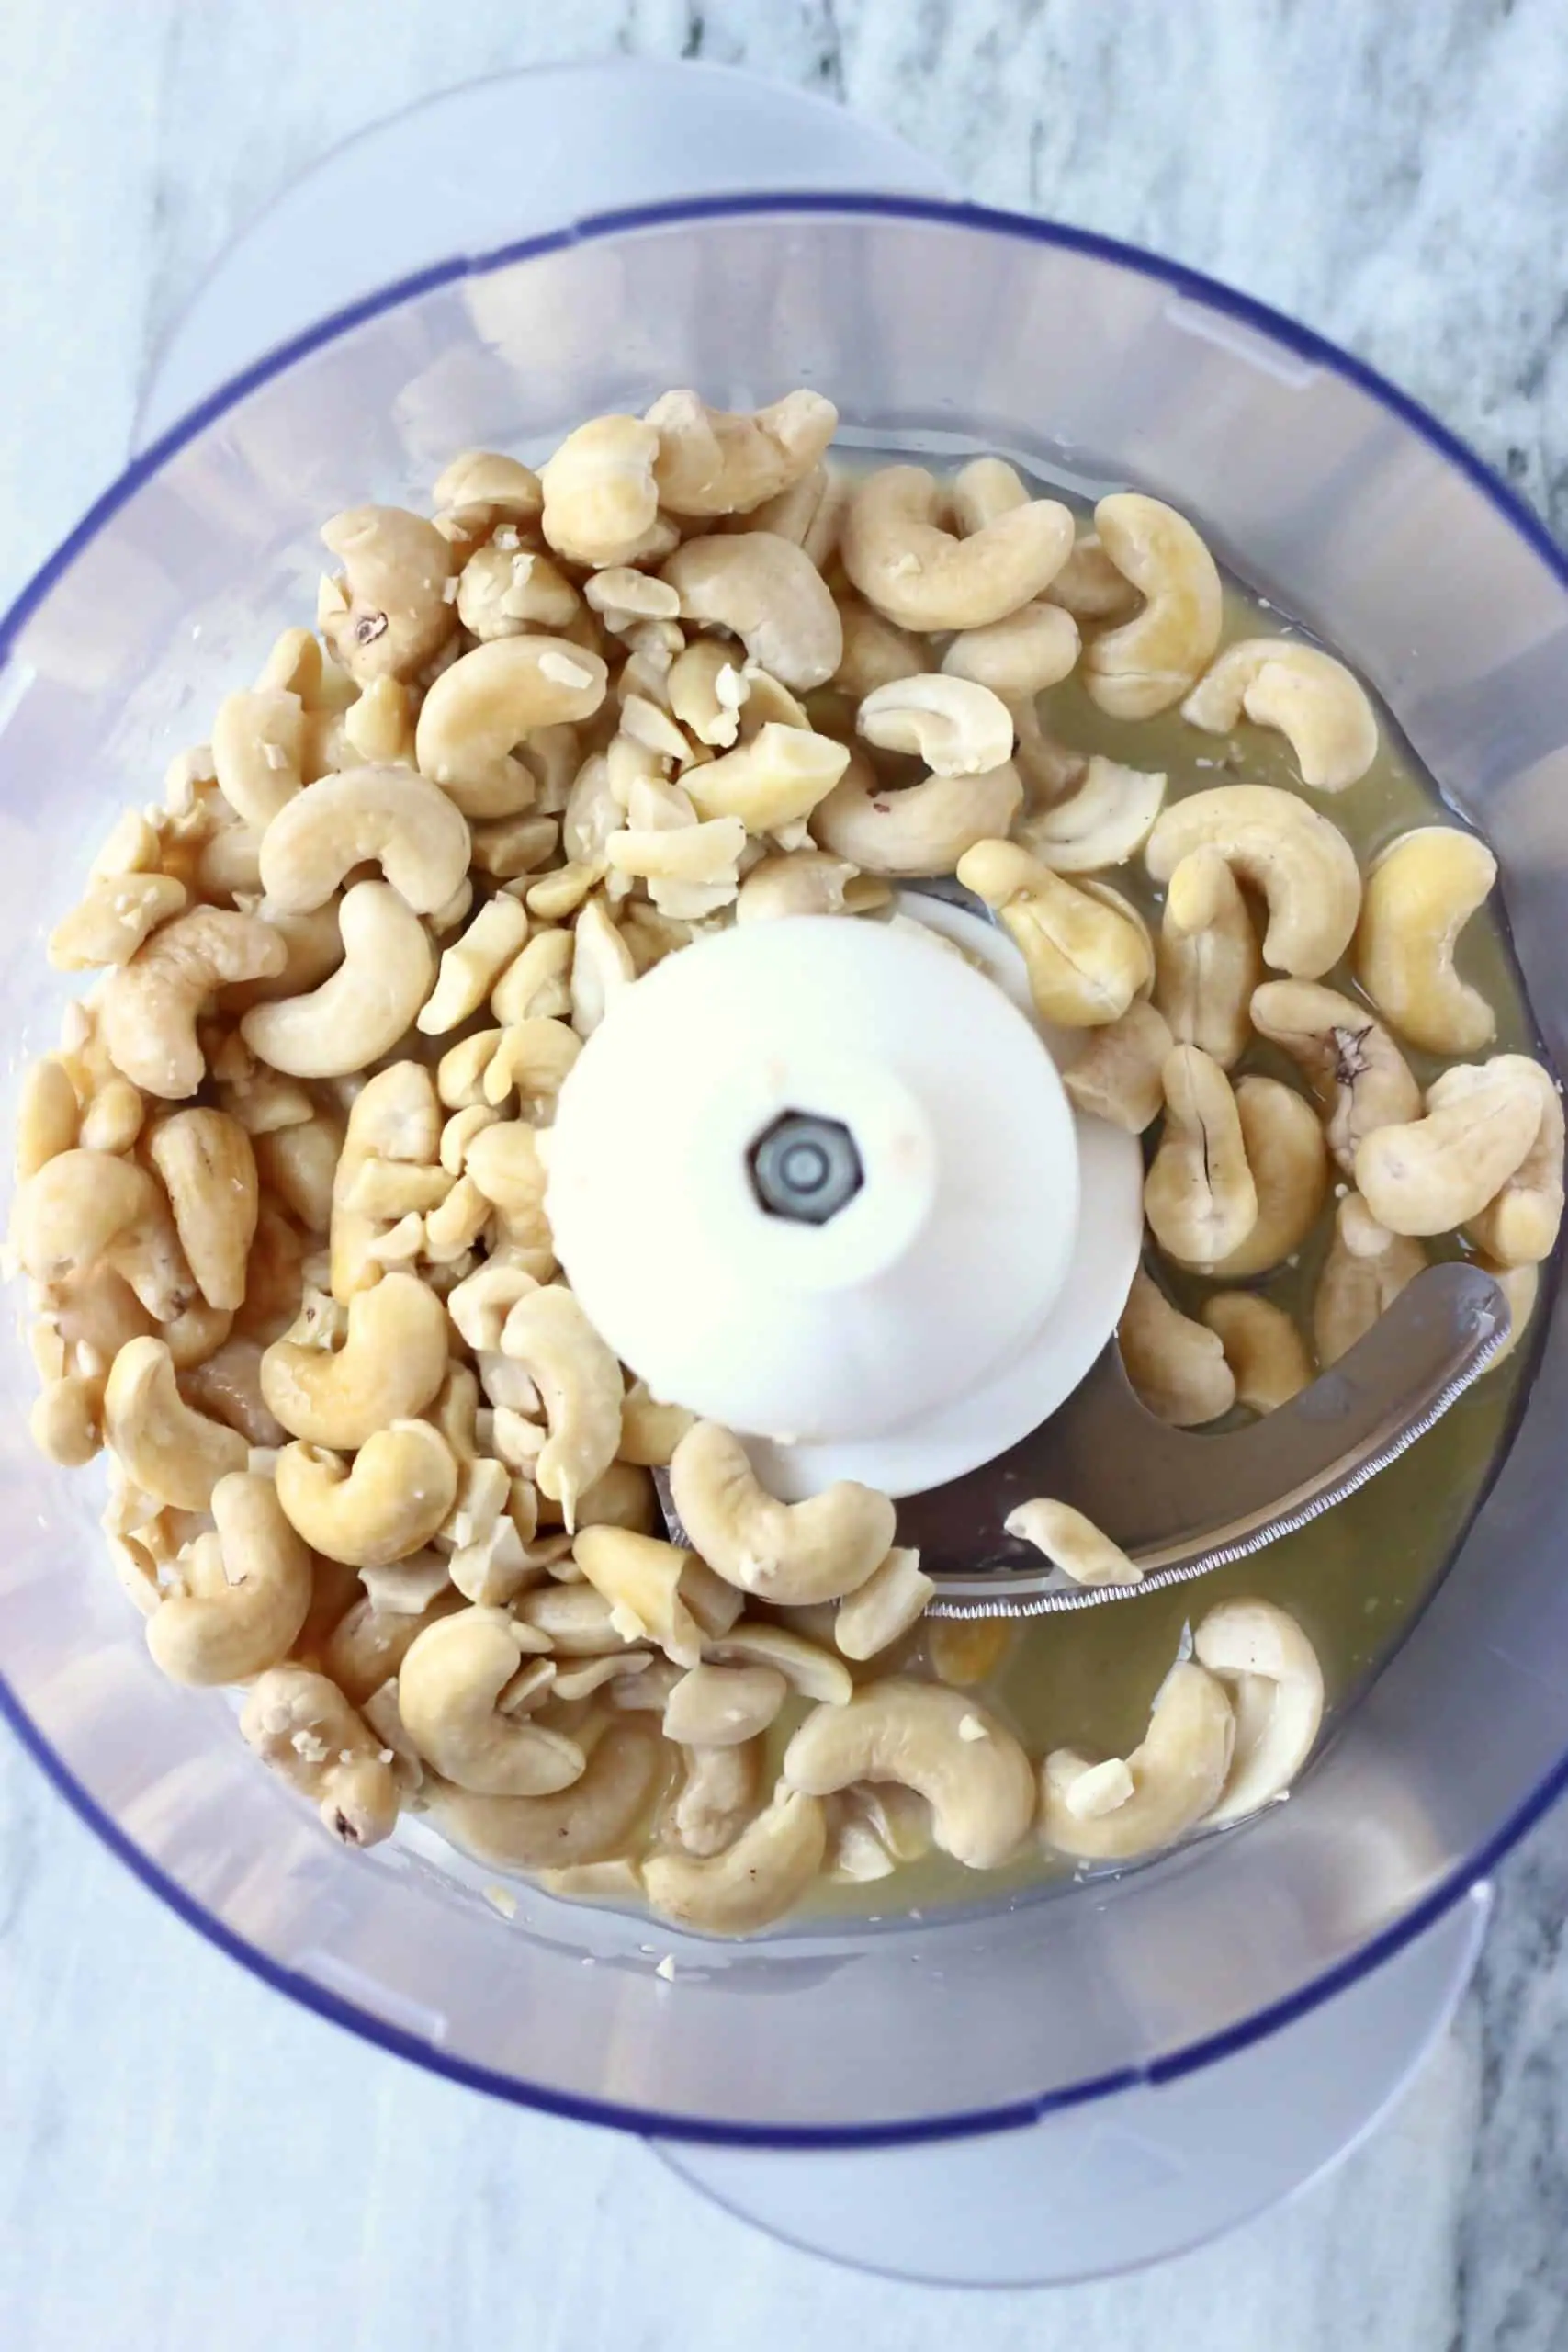 Cashew nuts, maple syrup and orange juice in a food processor